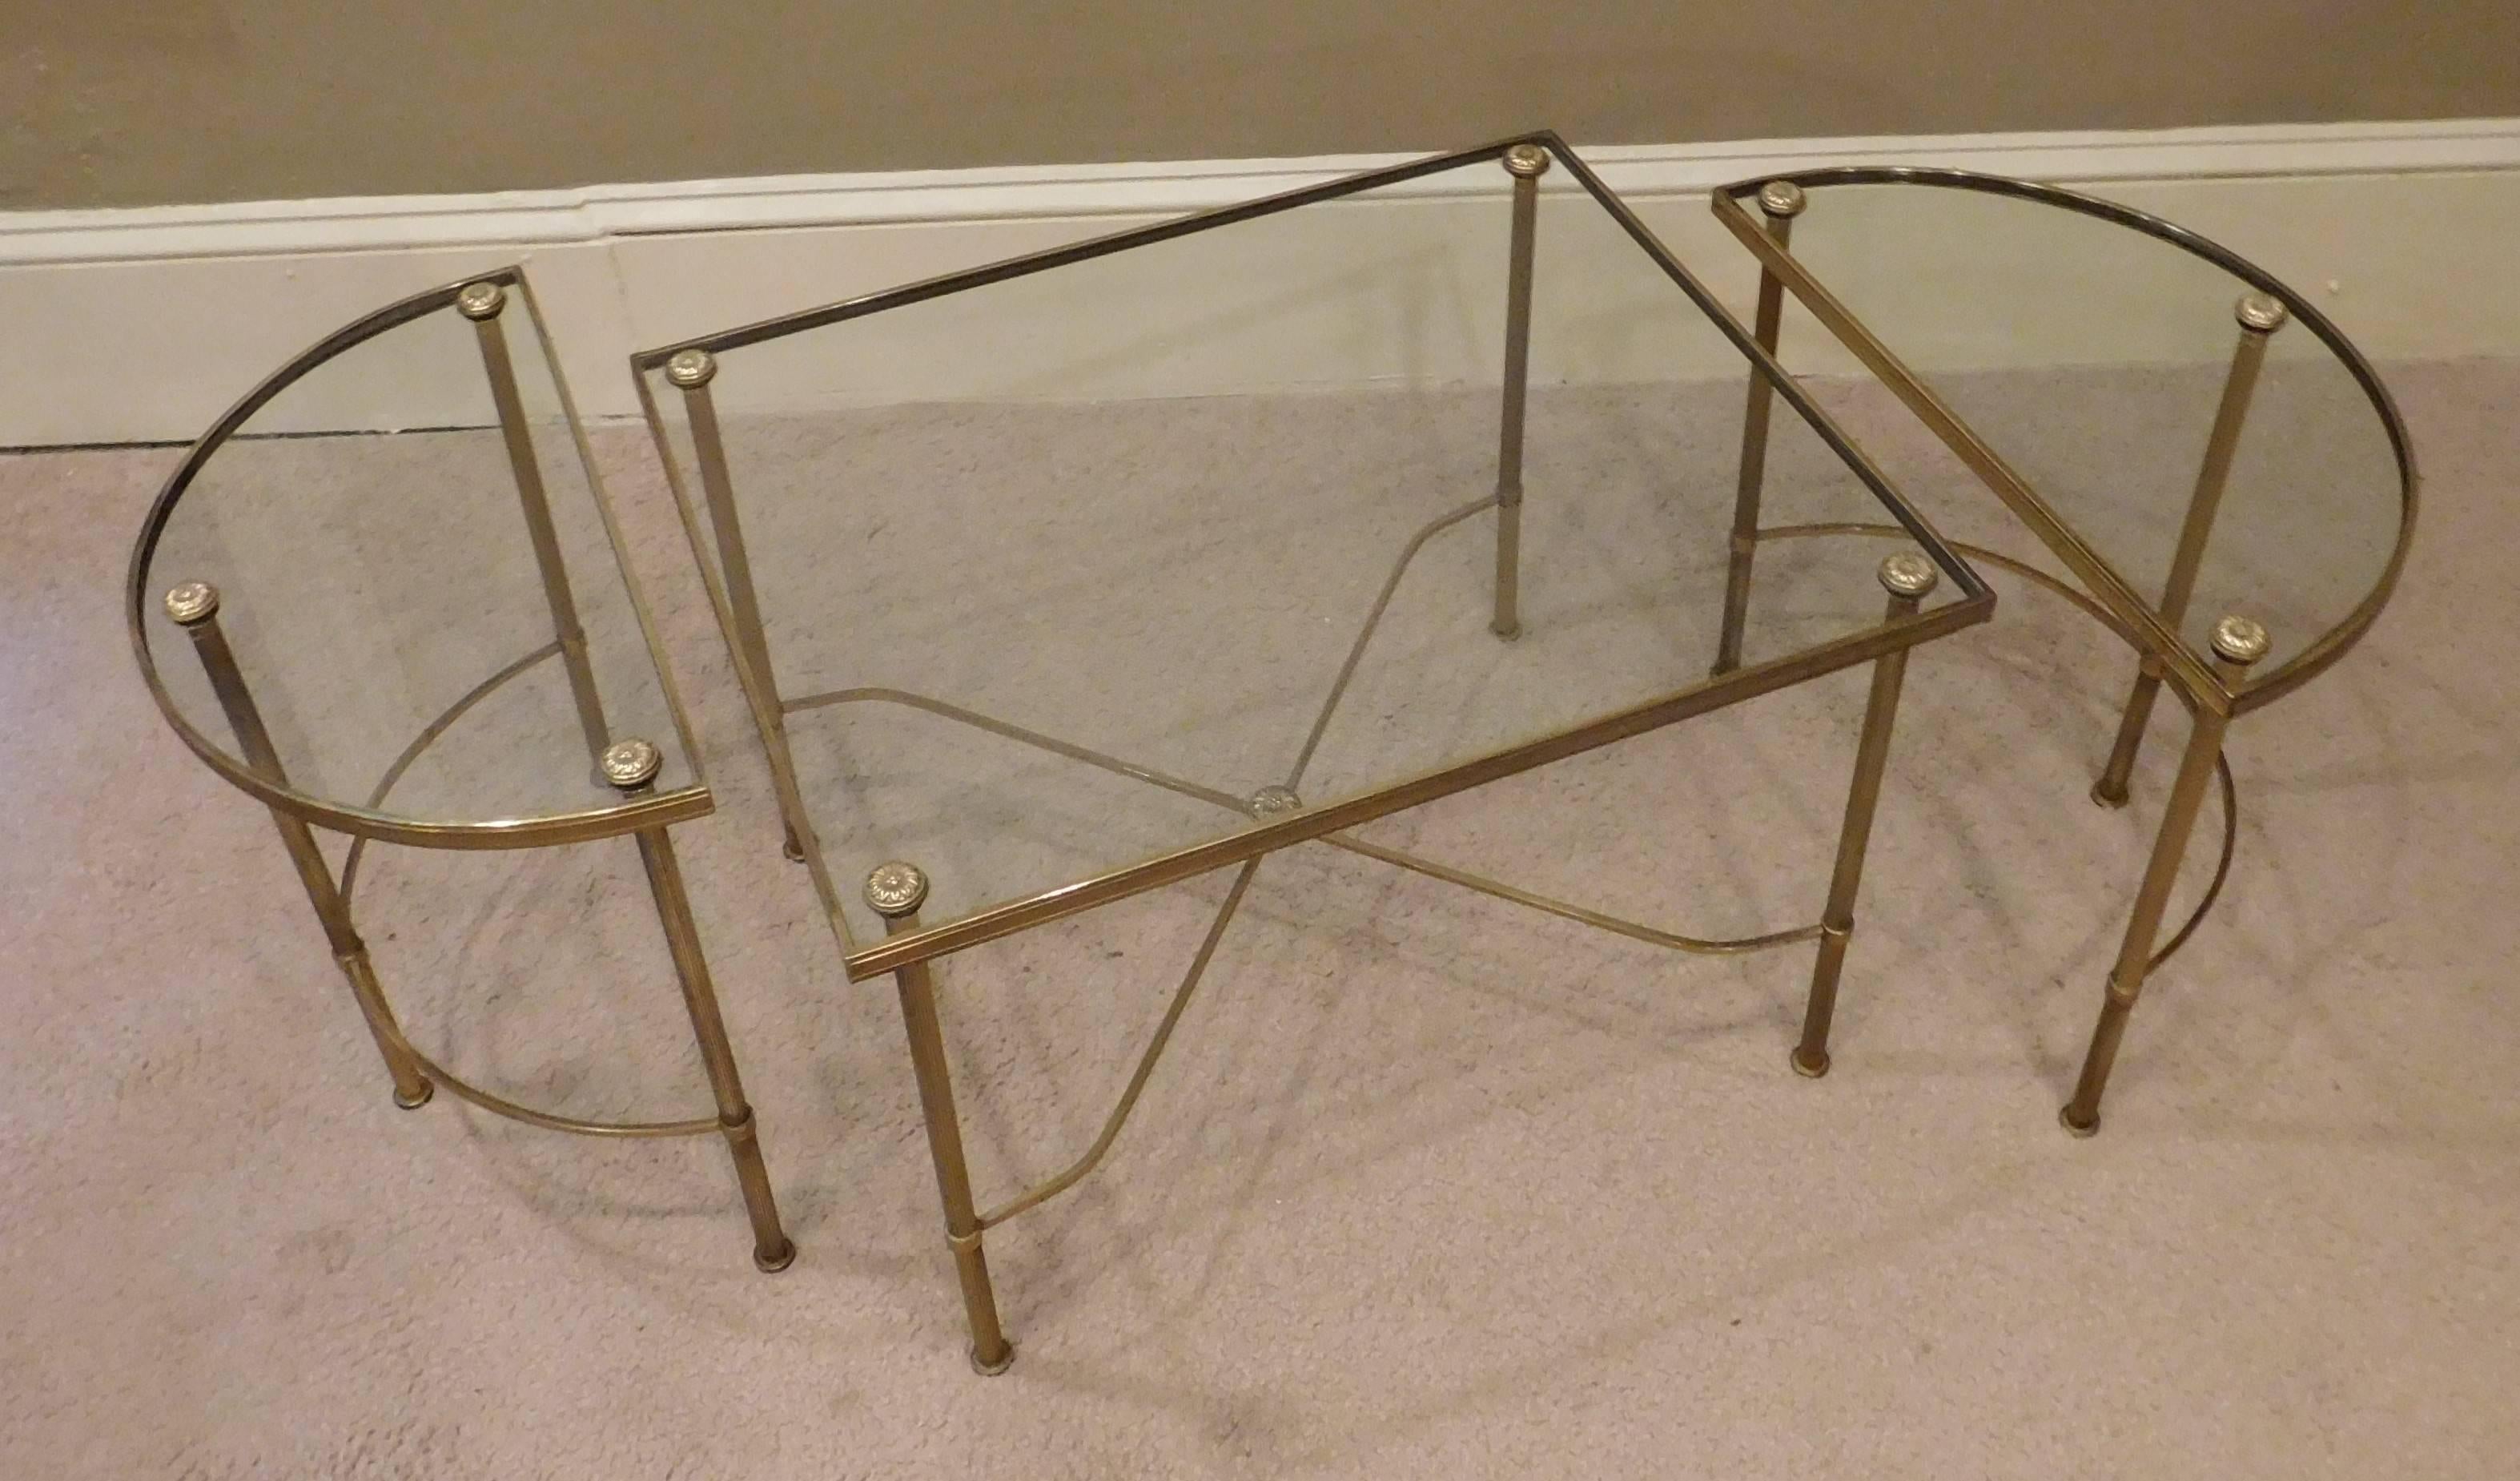 An oblong hand cast brass and glass top tripartite coffee table comprised of three independent sections. Finely-cast X-form stretchers and floral finials. End sections could be used separately as end tables - useful and handsome.